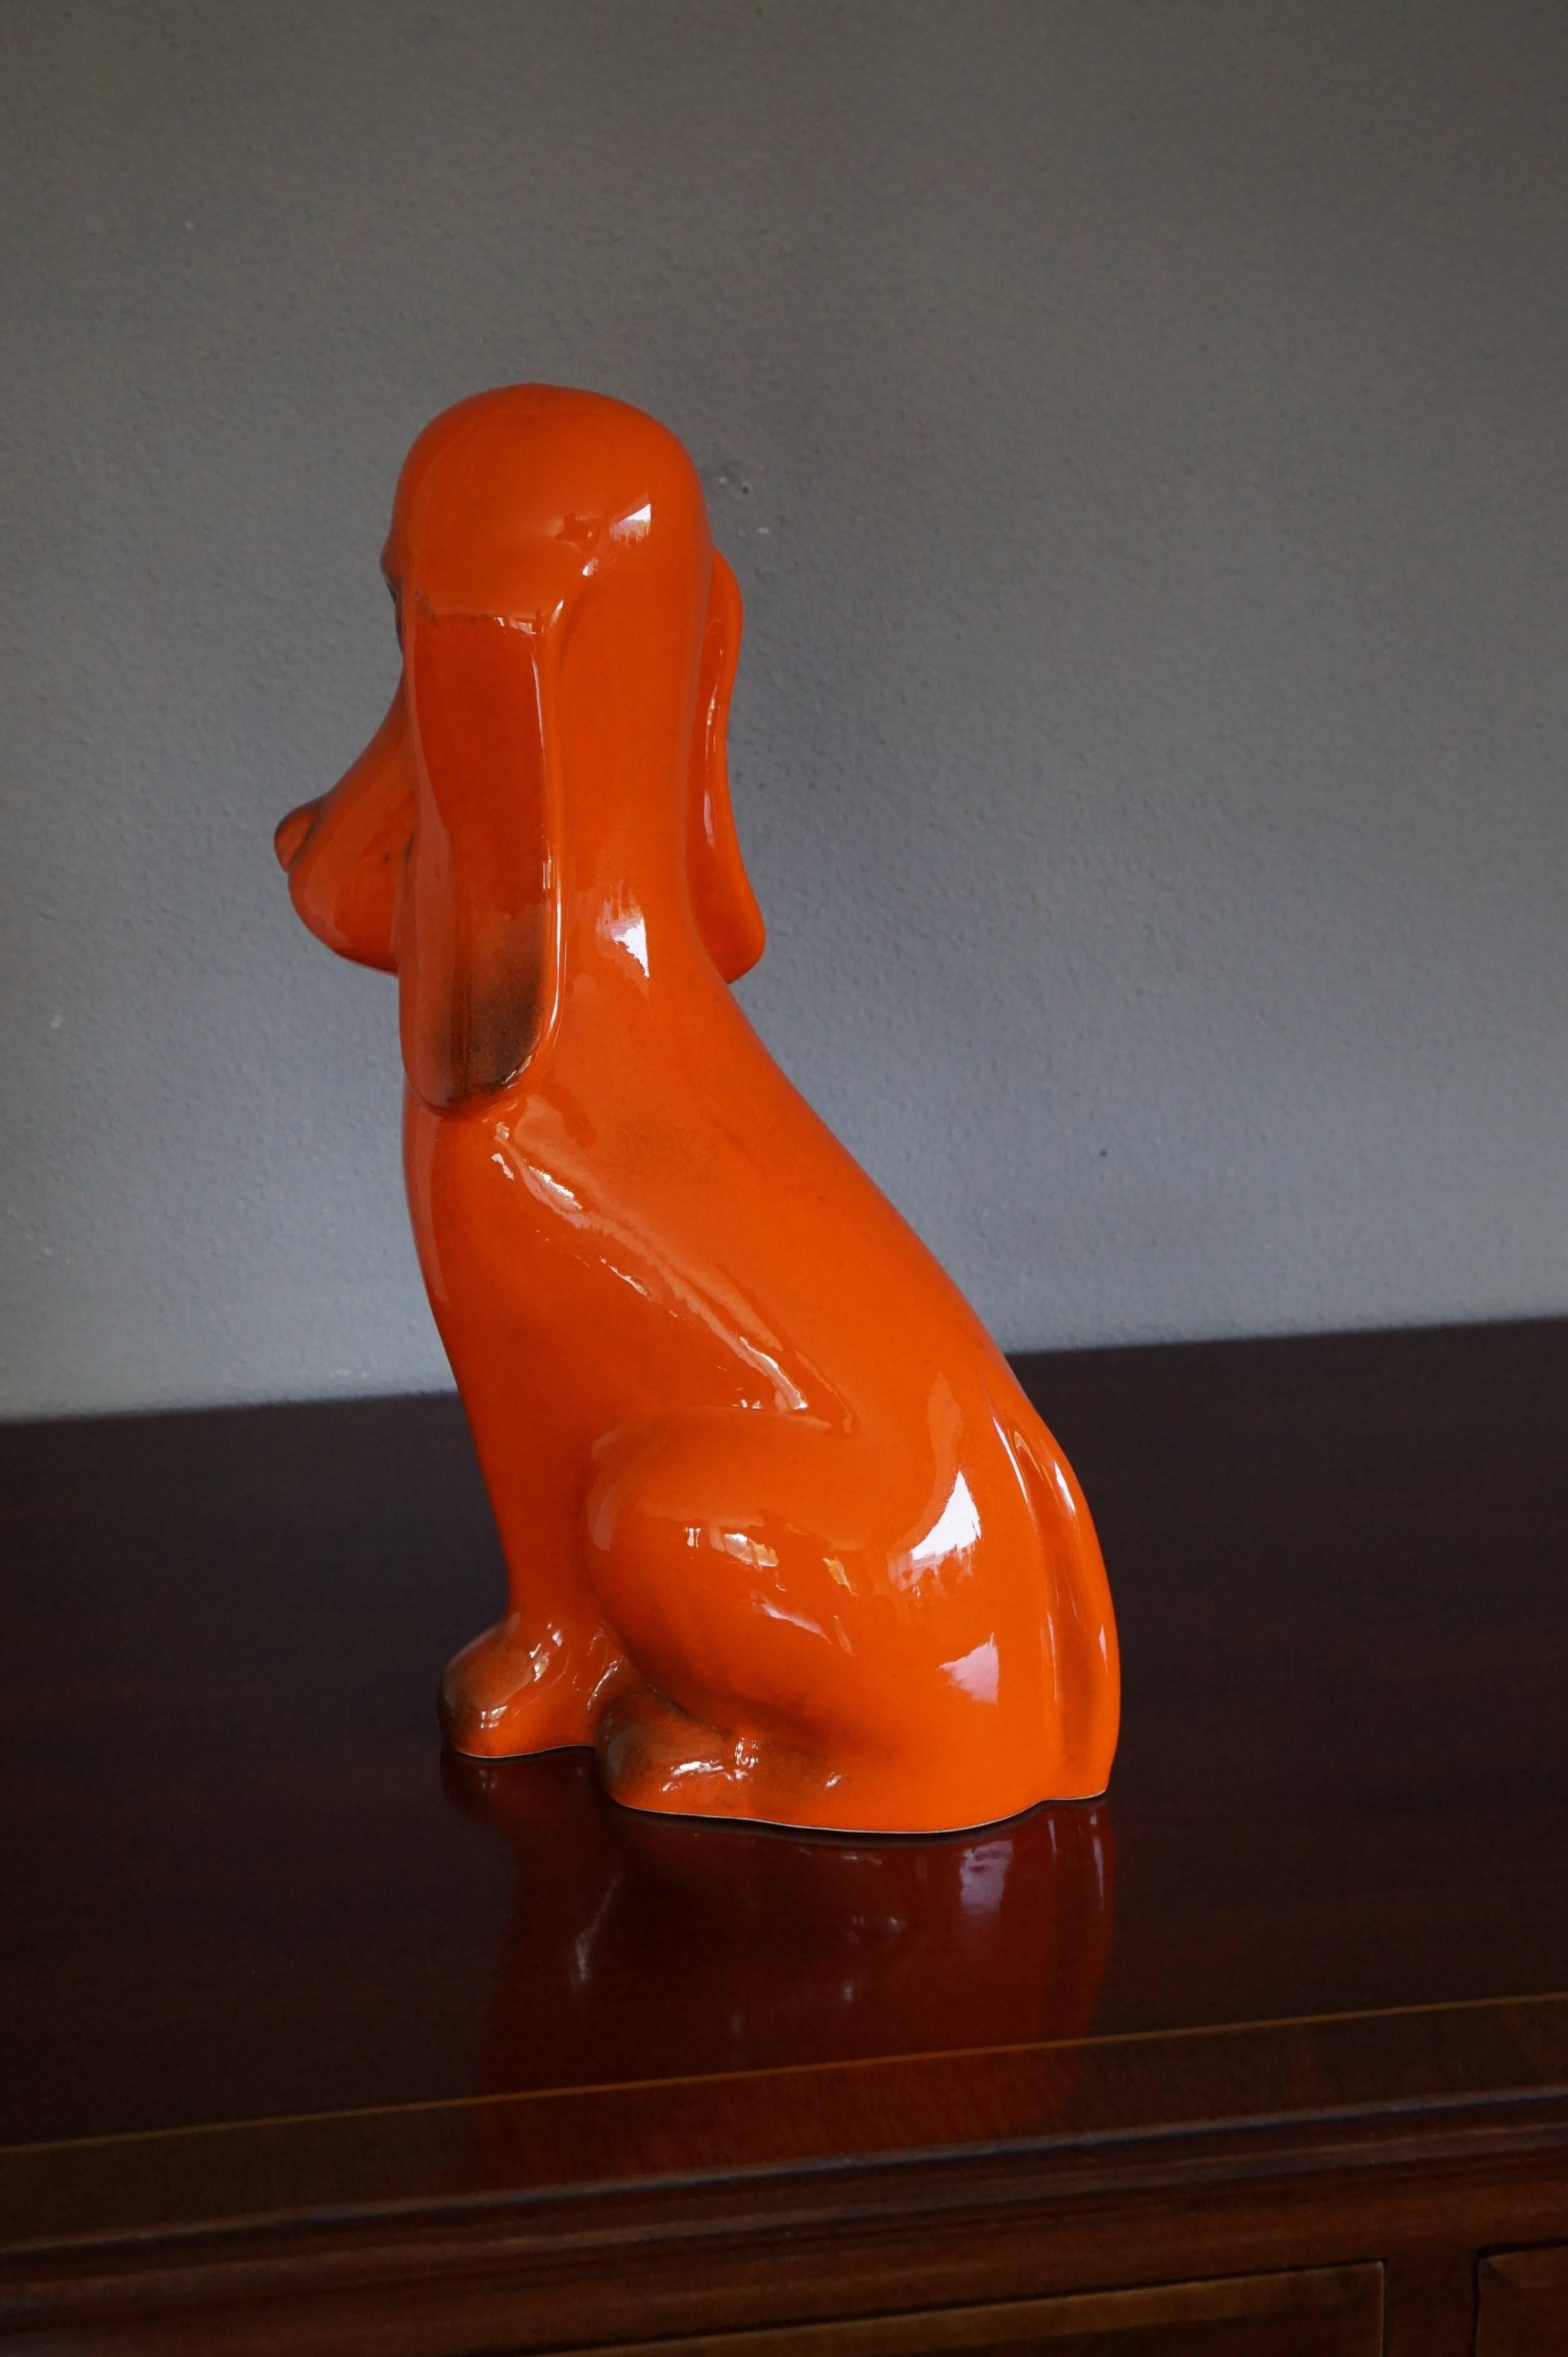 European Rare Midcentury Glazed and Marked, Stylized Basset Hound / Droopy Dog Sculpture